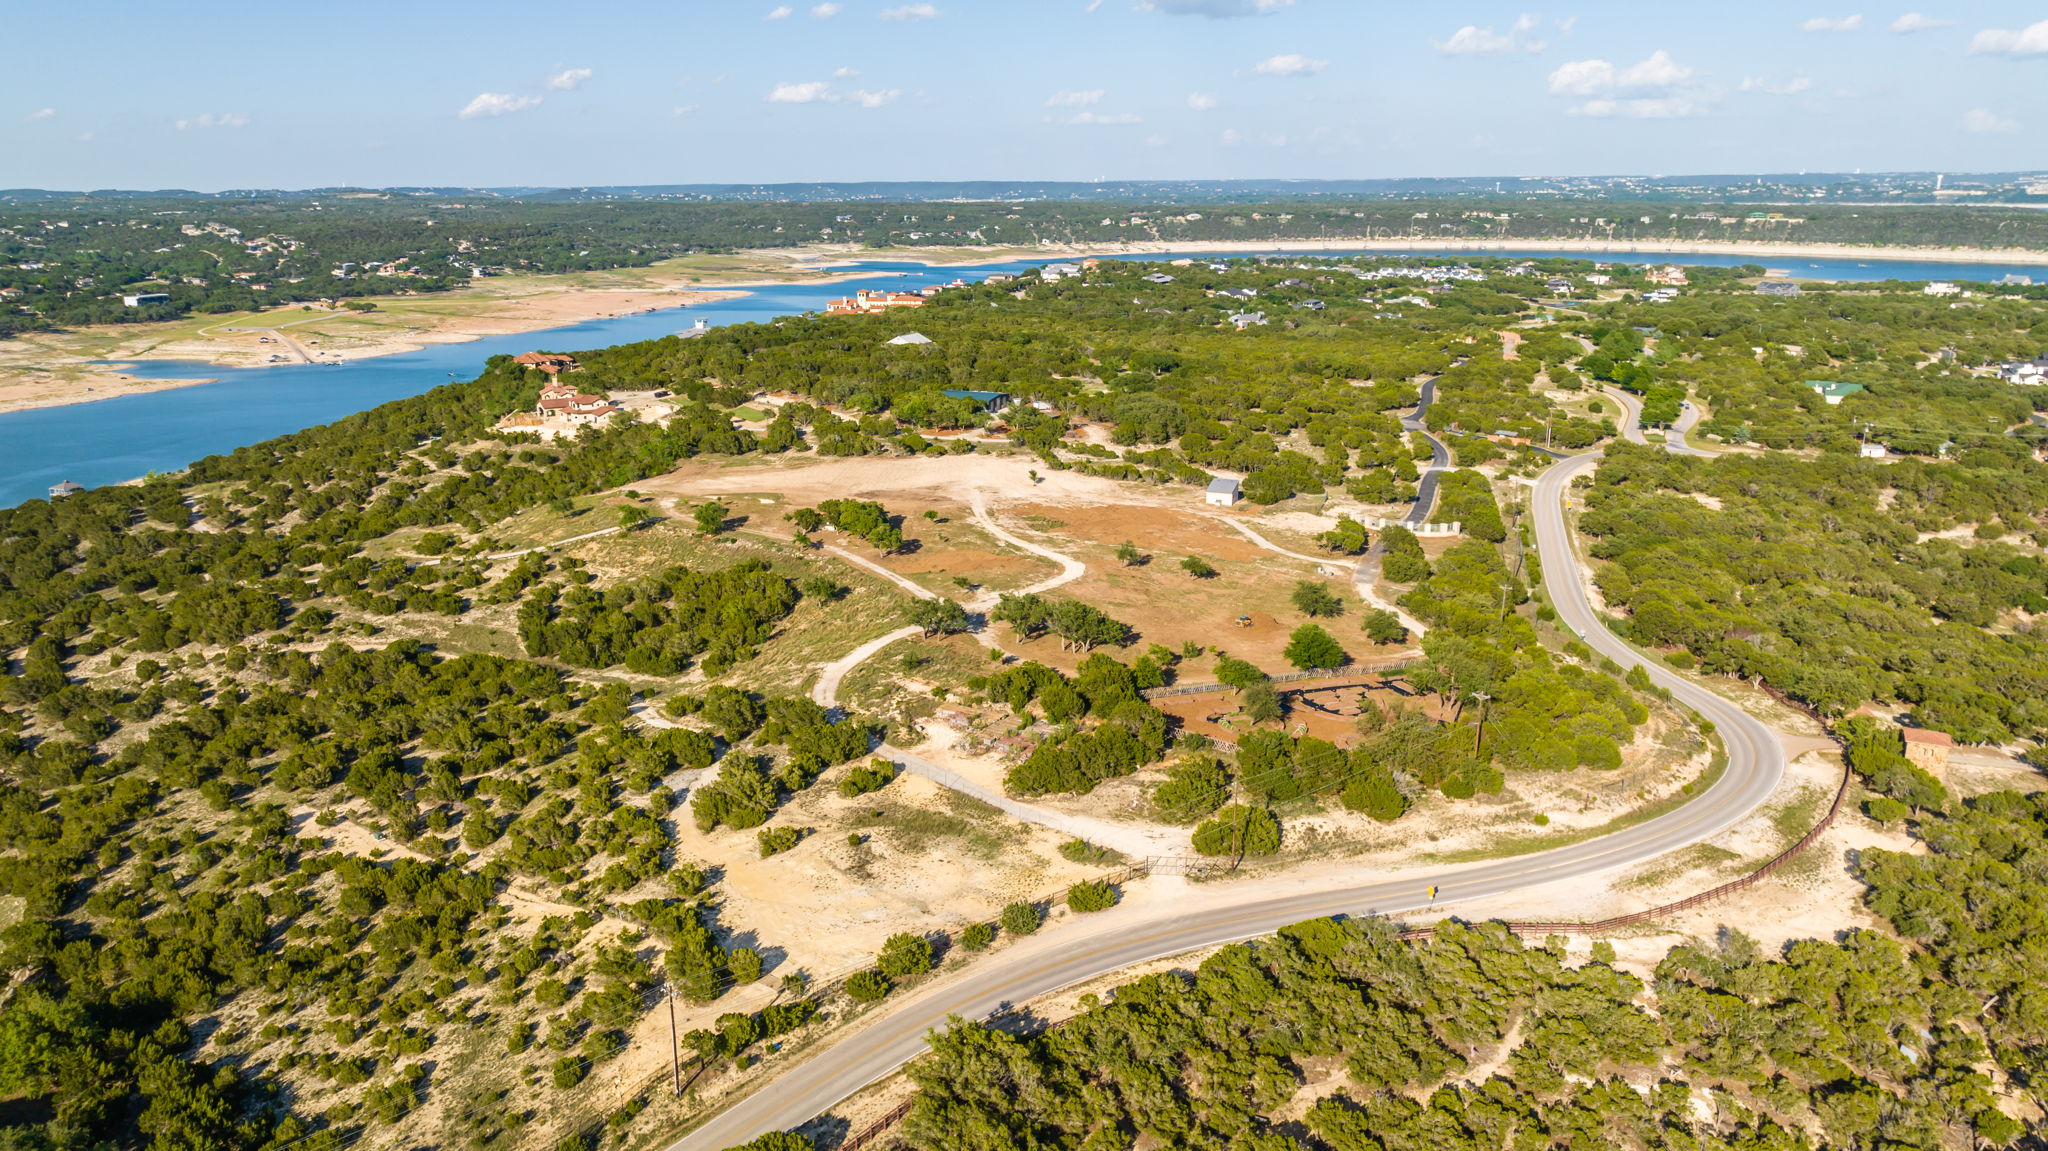 Imagine your new home on this 23.85 acreage property with South Shore Lake Travis access (about 500 feet of waterfront). The partially cleared area would be ideal to capture those panoramic views.